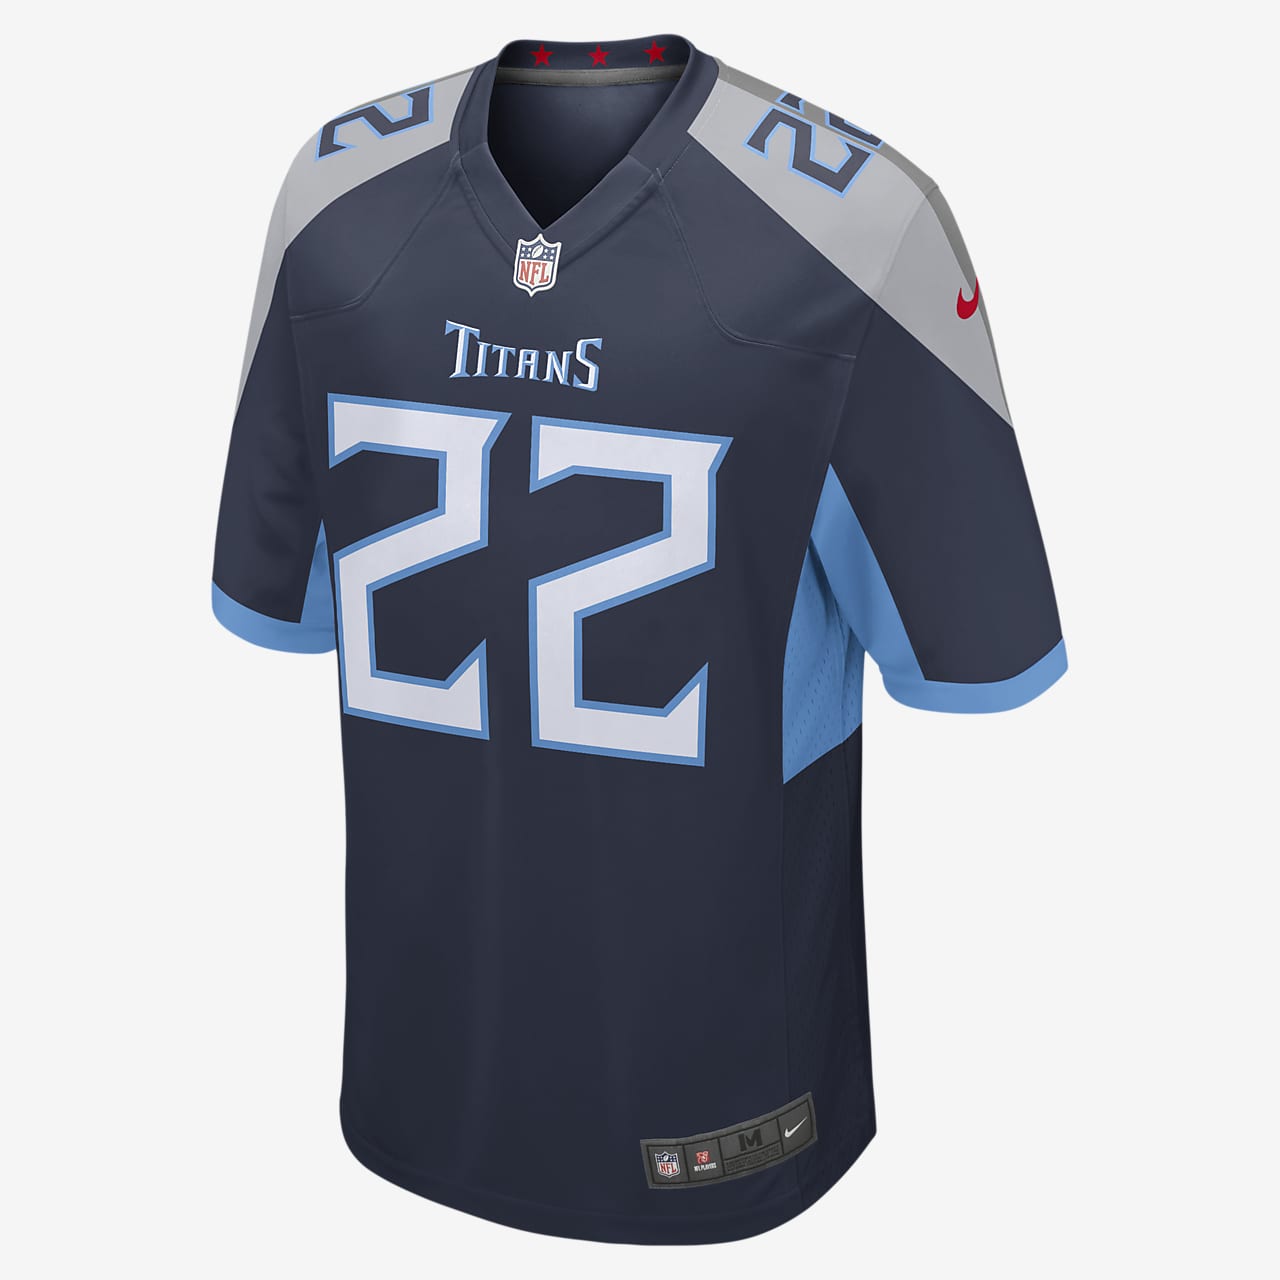 where to buy titans jersey